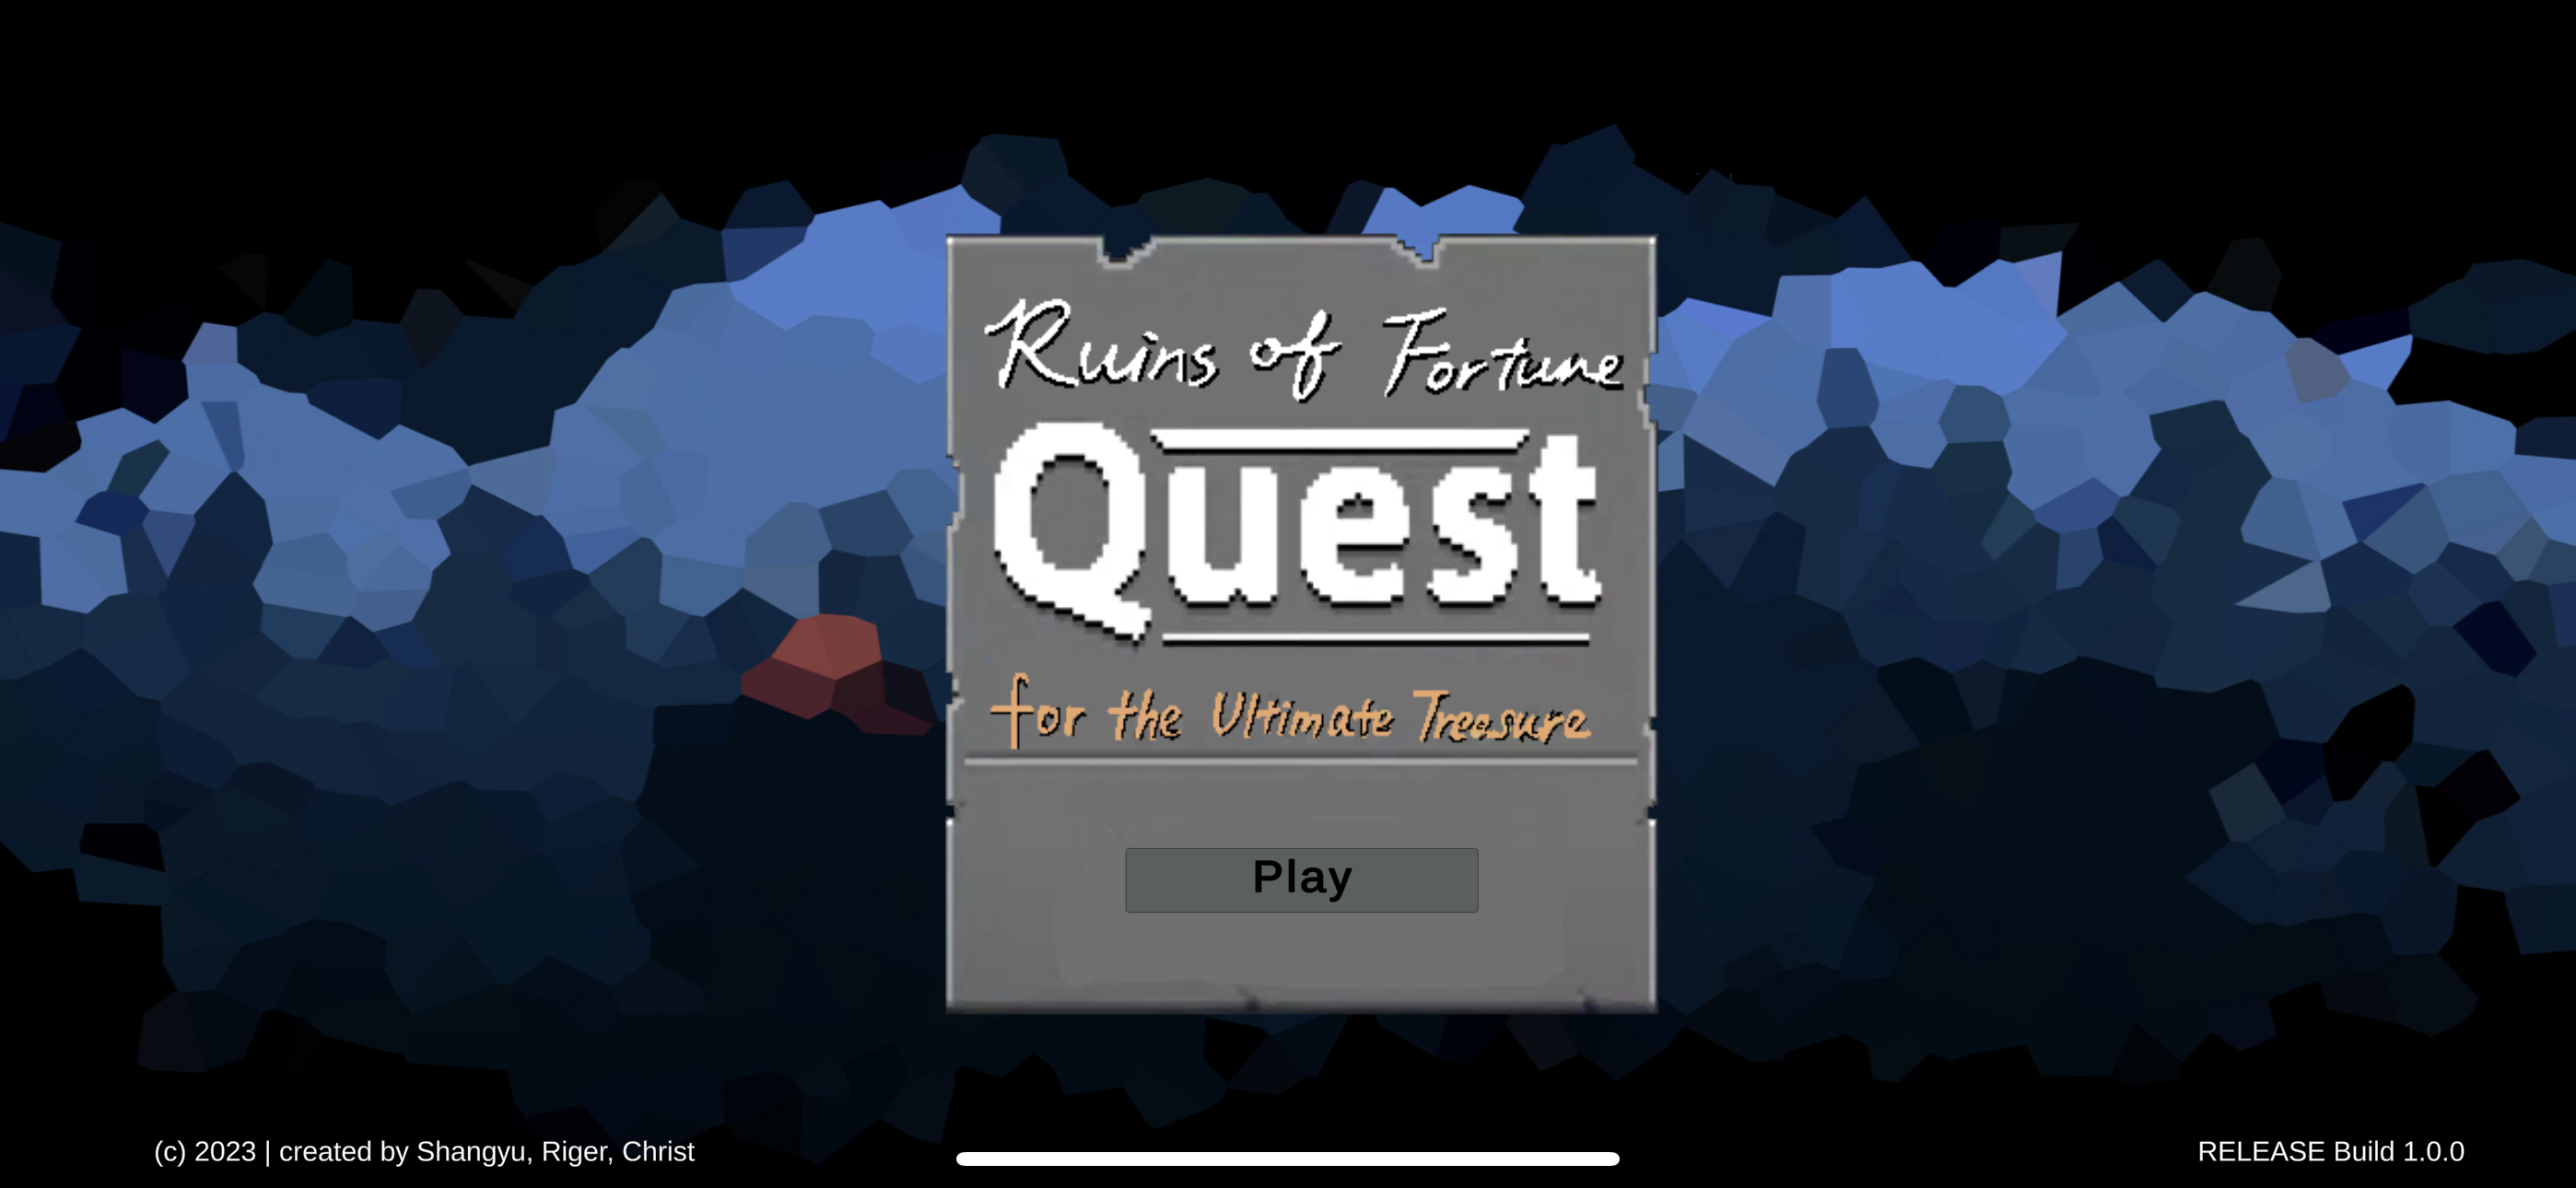 "Ruins of Fortune:  The Quest for the Ultimate Treasure"